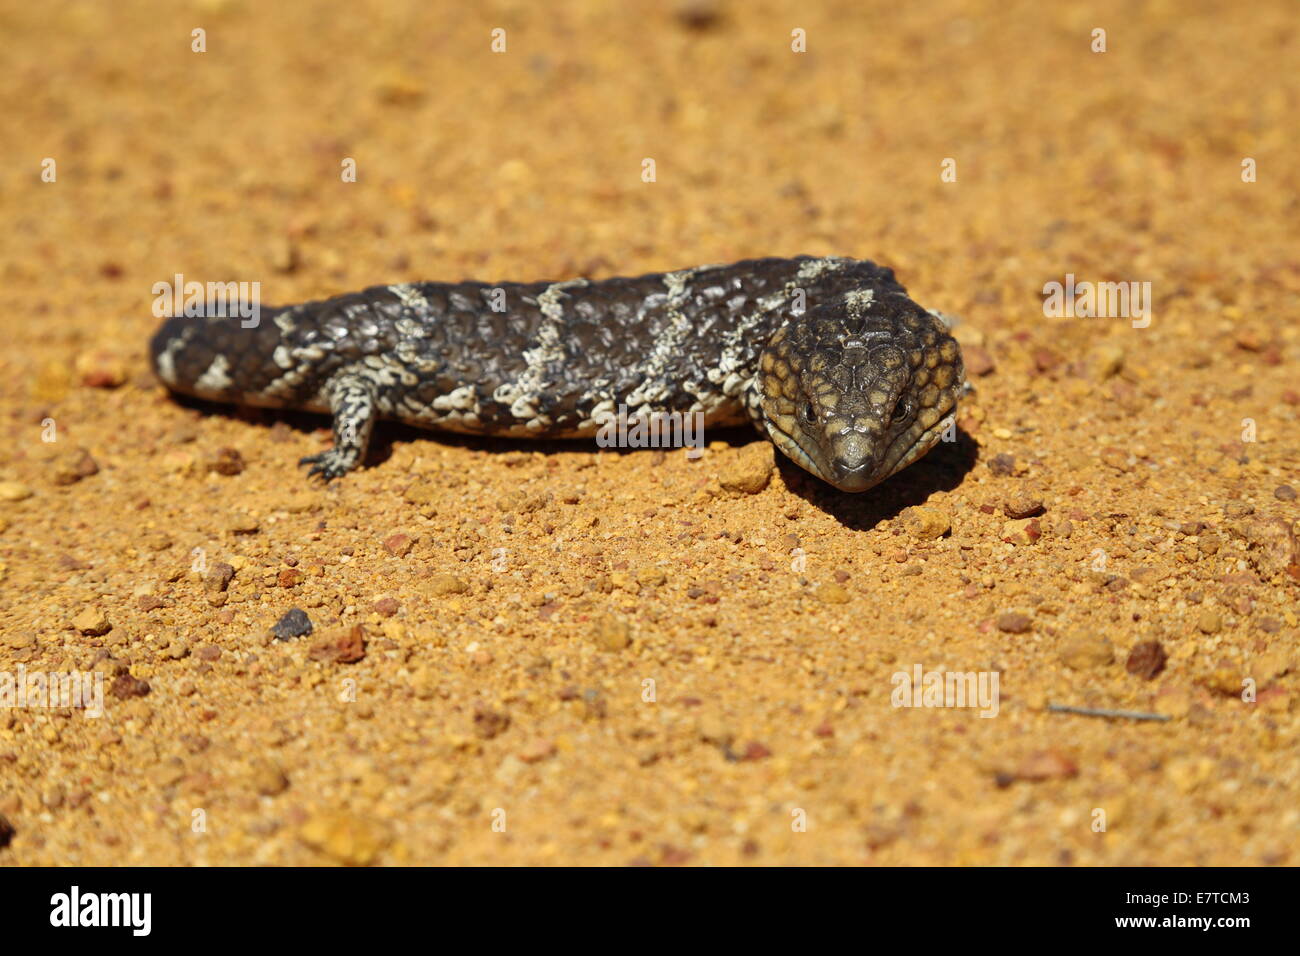 A Blue-tongued Skink (commonly called blue-tongued lizard) basks on a rural road near Hyden, Western Australia, Australia. Stock Photo